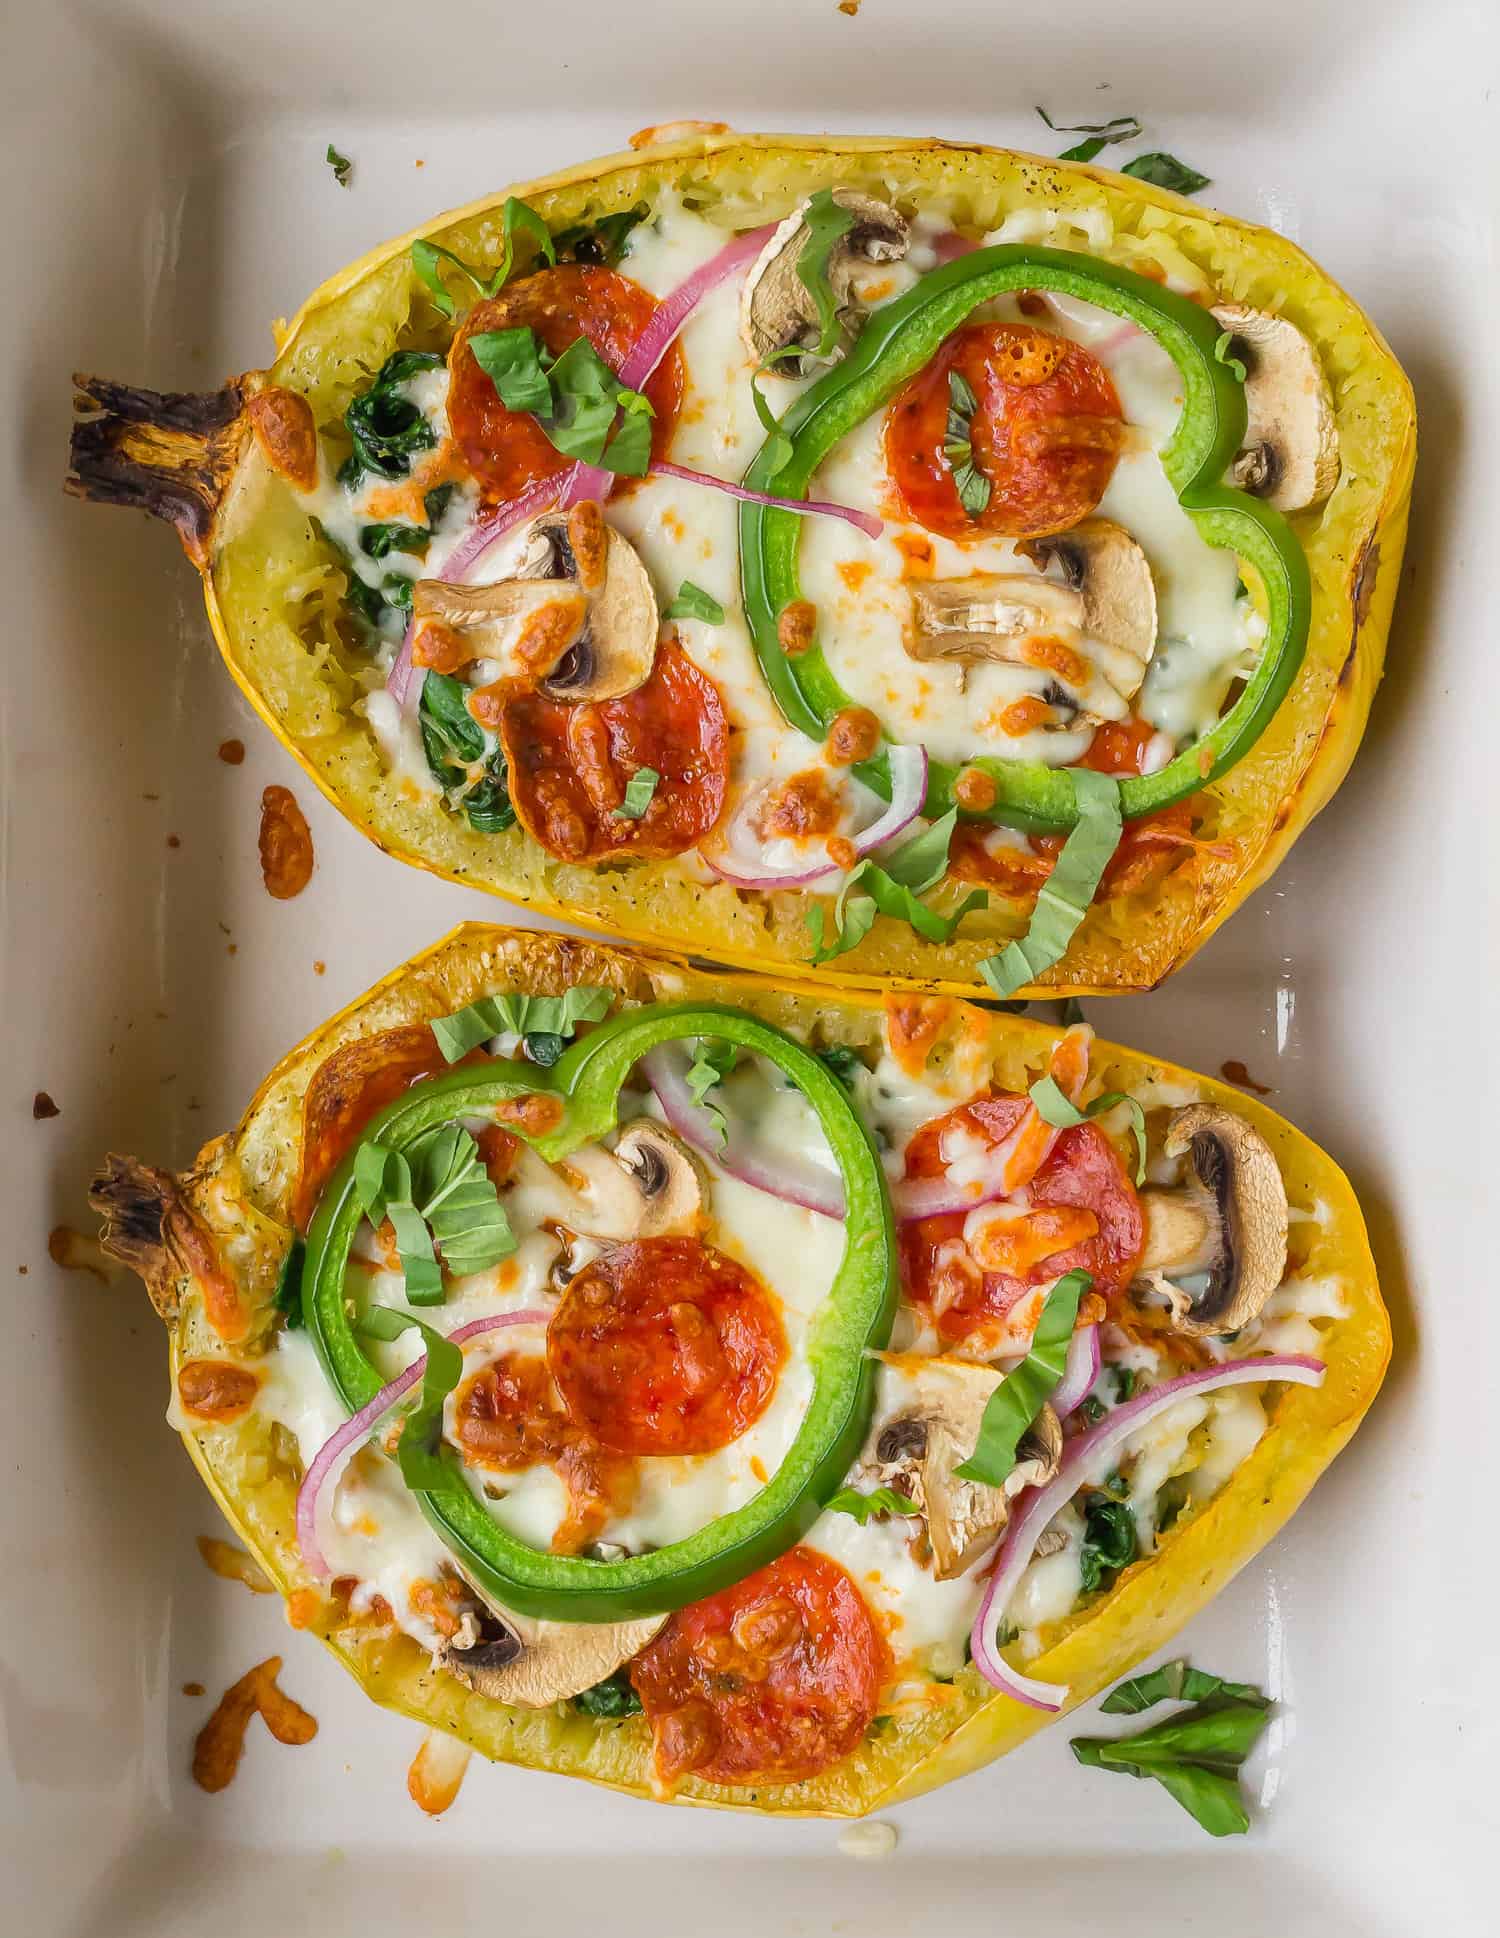 Pizza stuffed spaghetti squash with cheese, pepperoni, and vegetables.